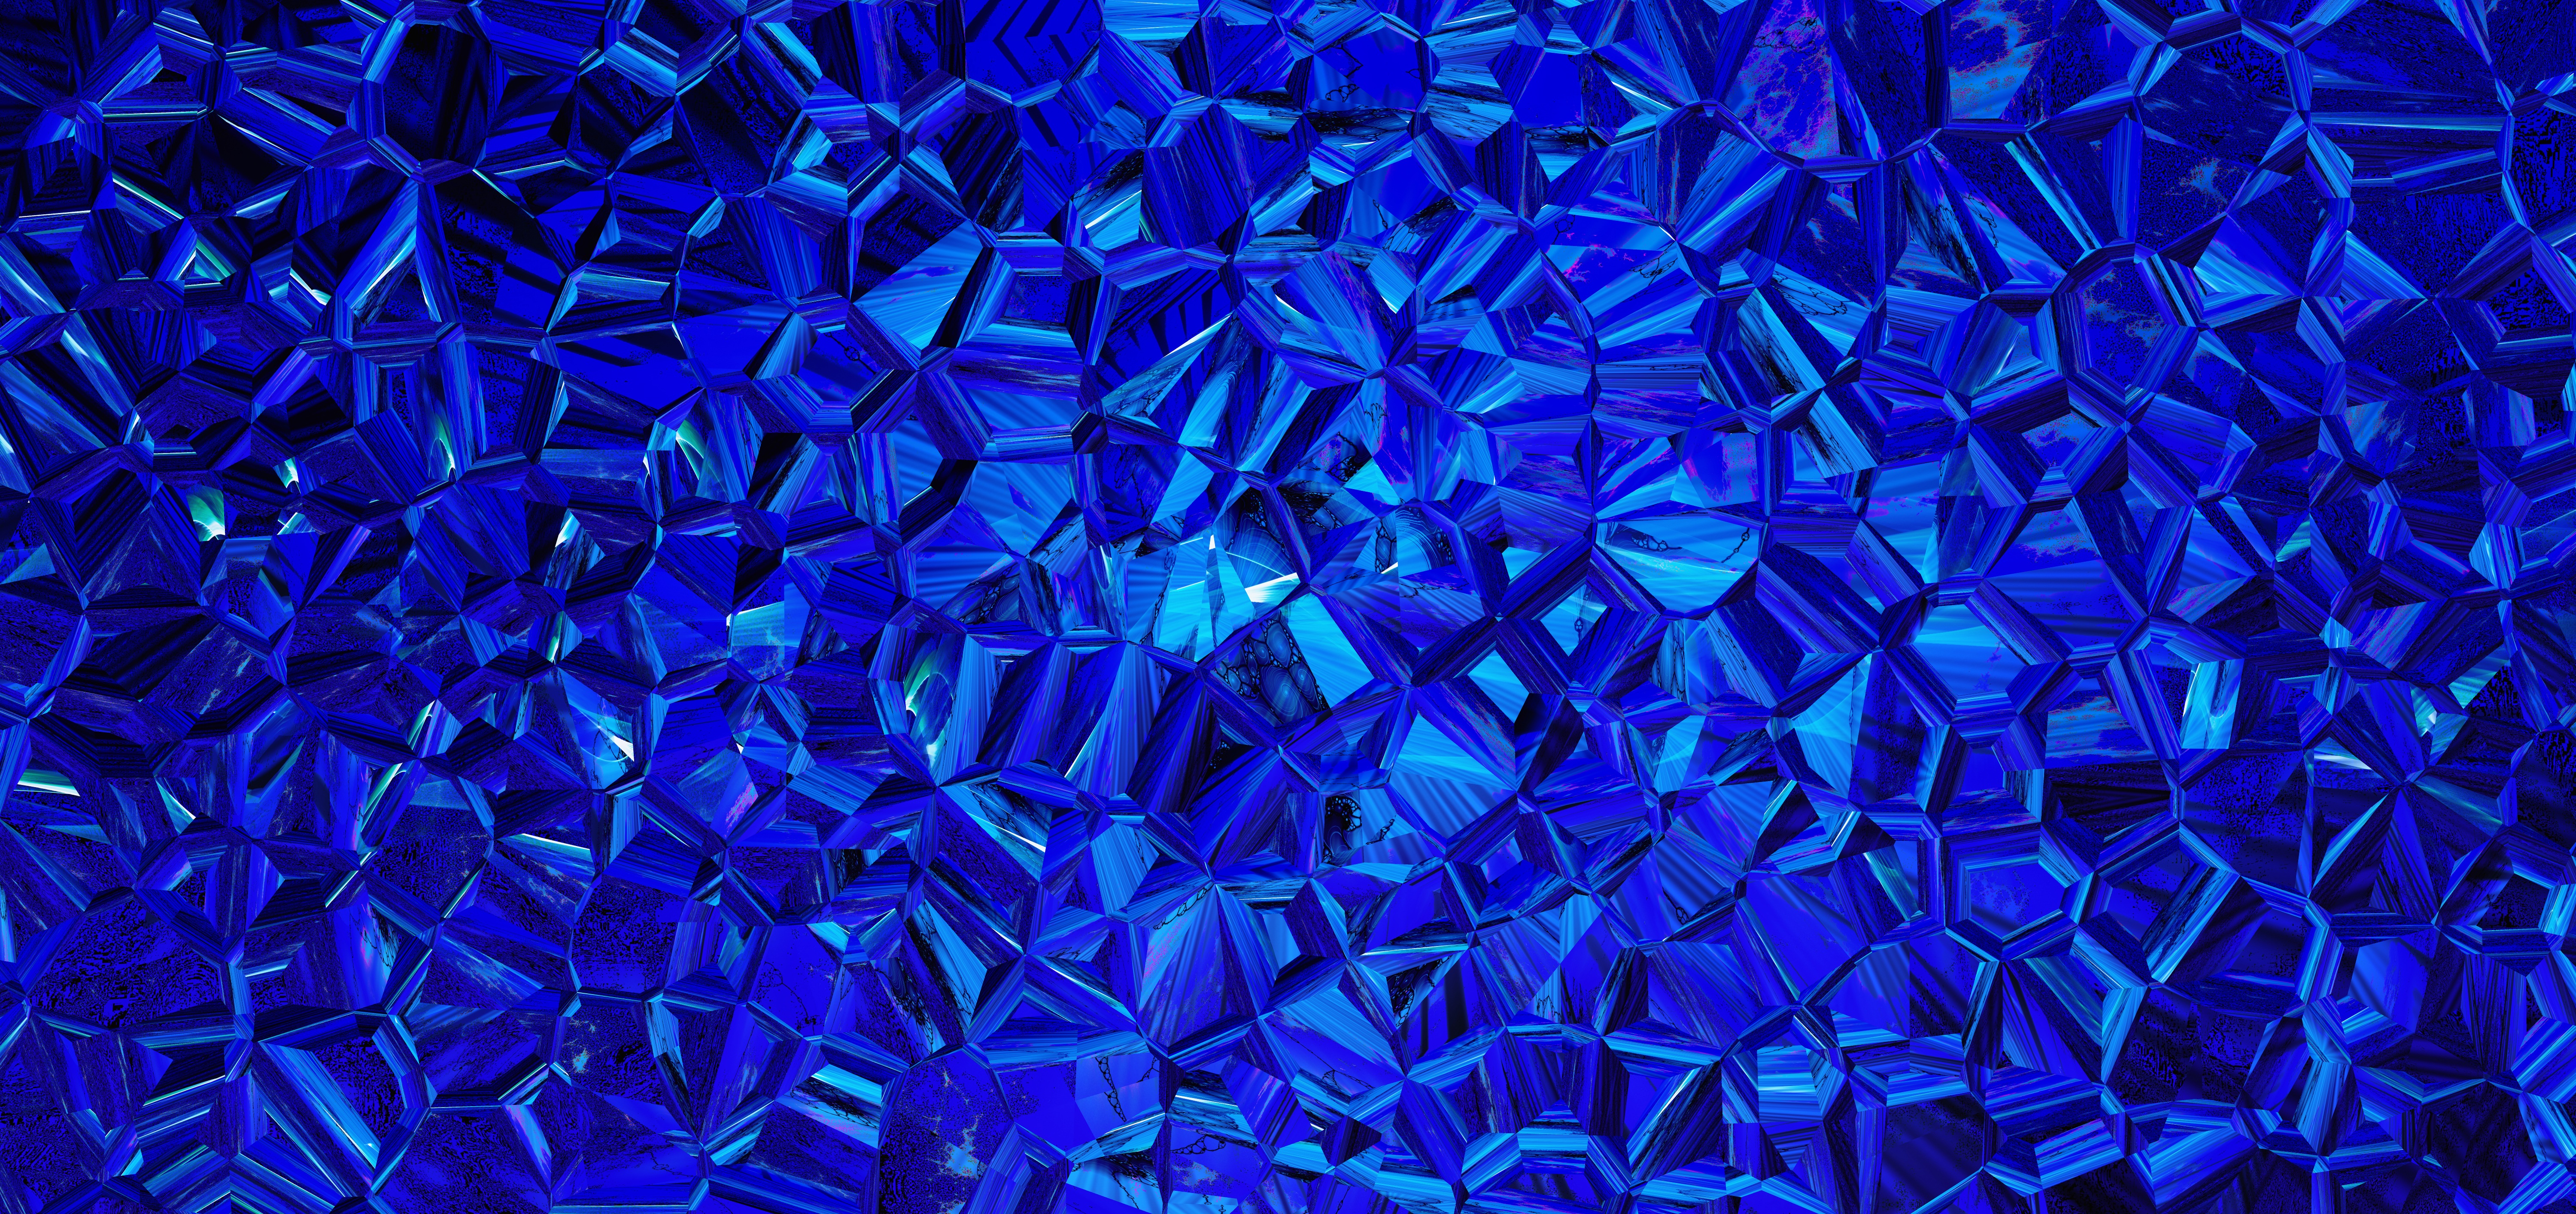 Wallpaper Full HD texture, textures, blue, prismatic, triangles, prism, polygons